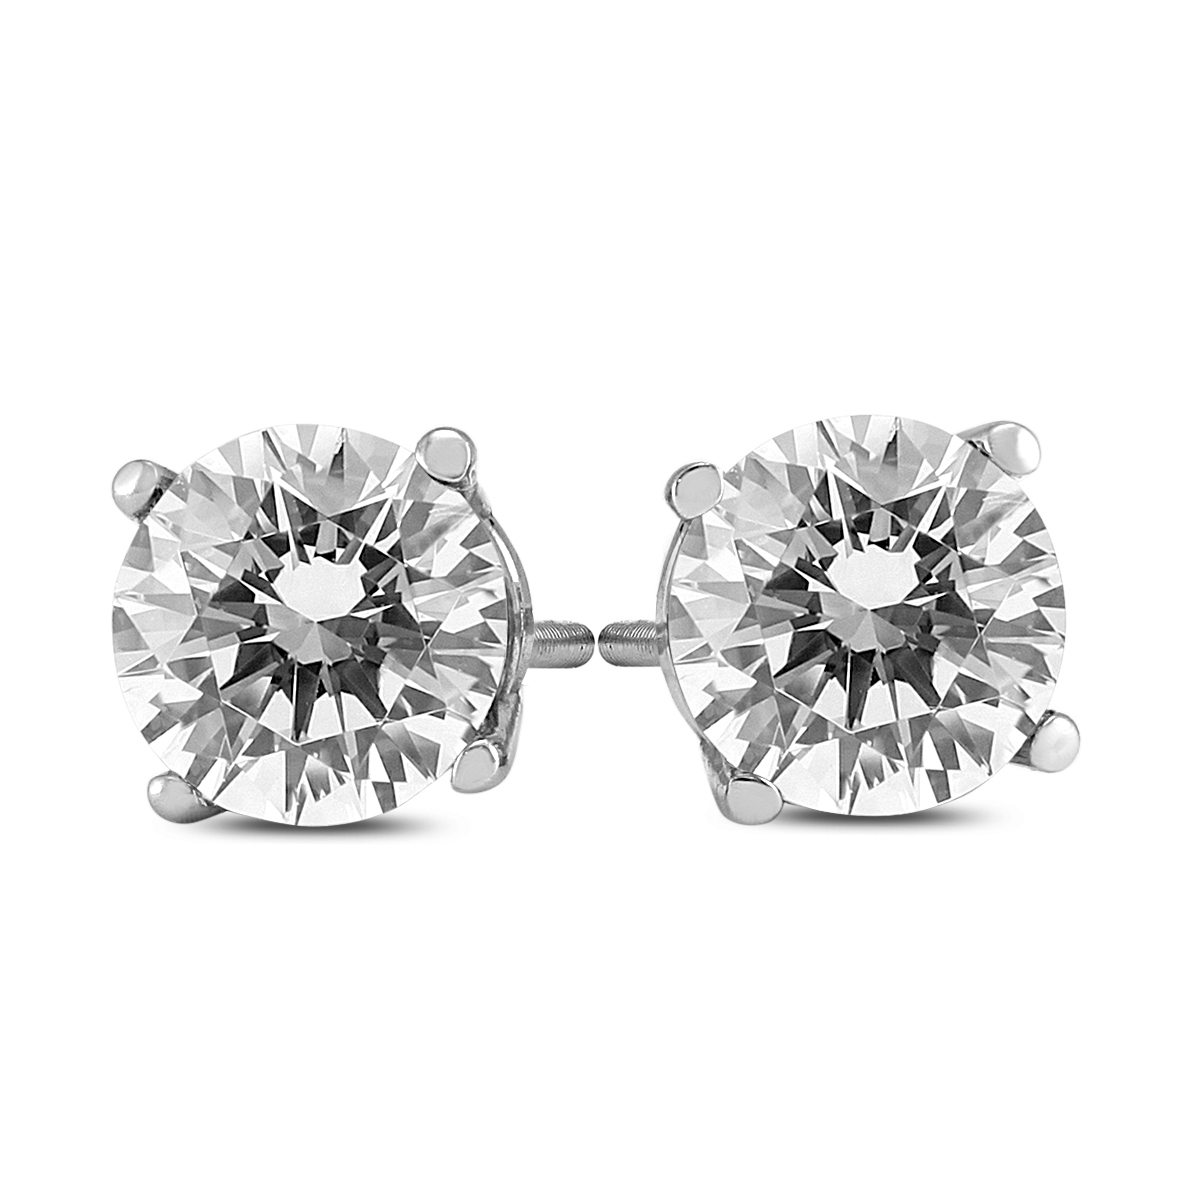 1 1/2 Carat TW AGS Certified Round Diamond Solitaire Stud Earrings in 14K White Gold (I-J Color, SI1-SI2 Clarity)